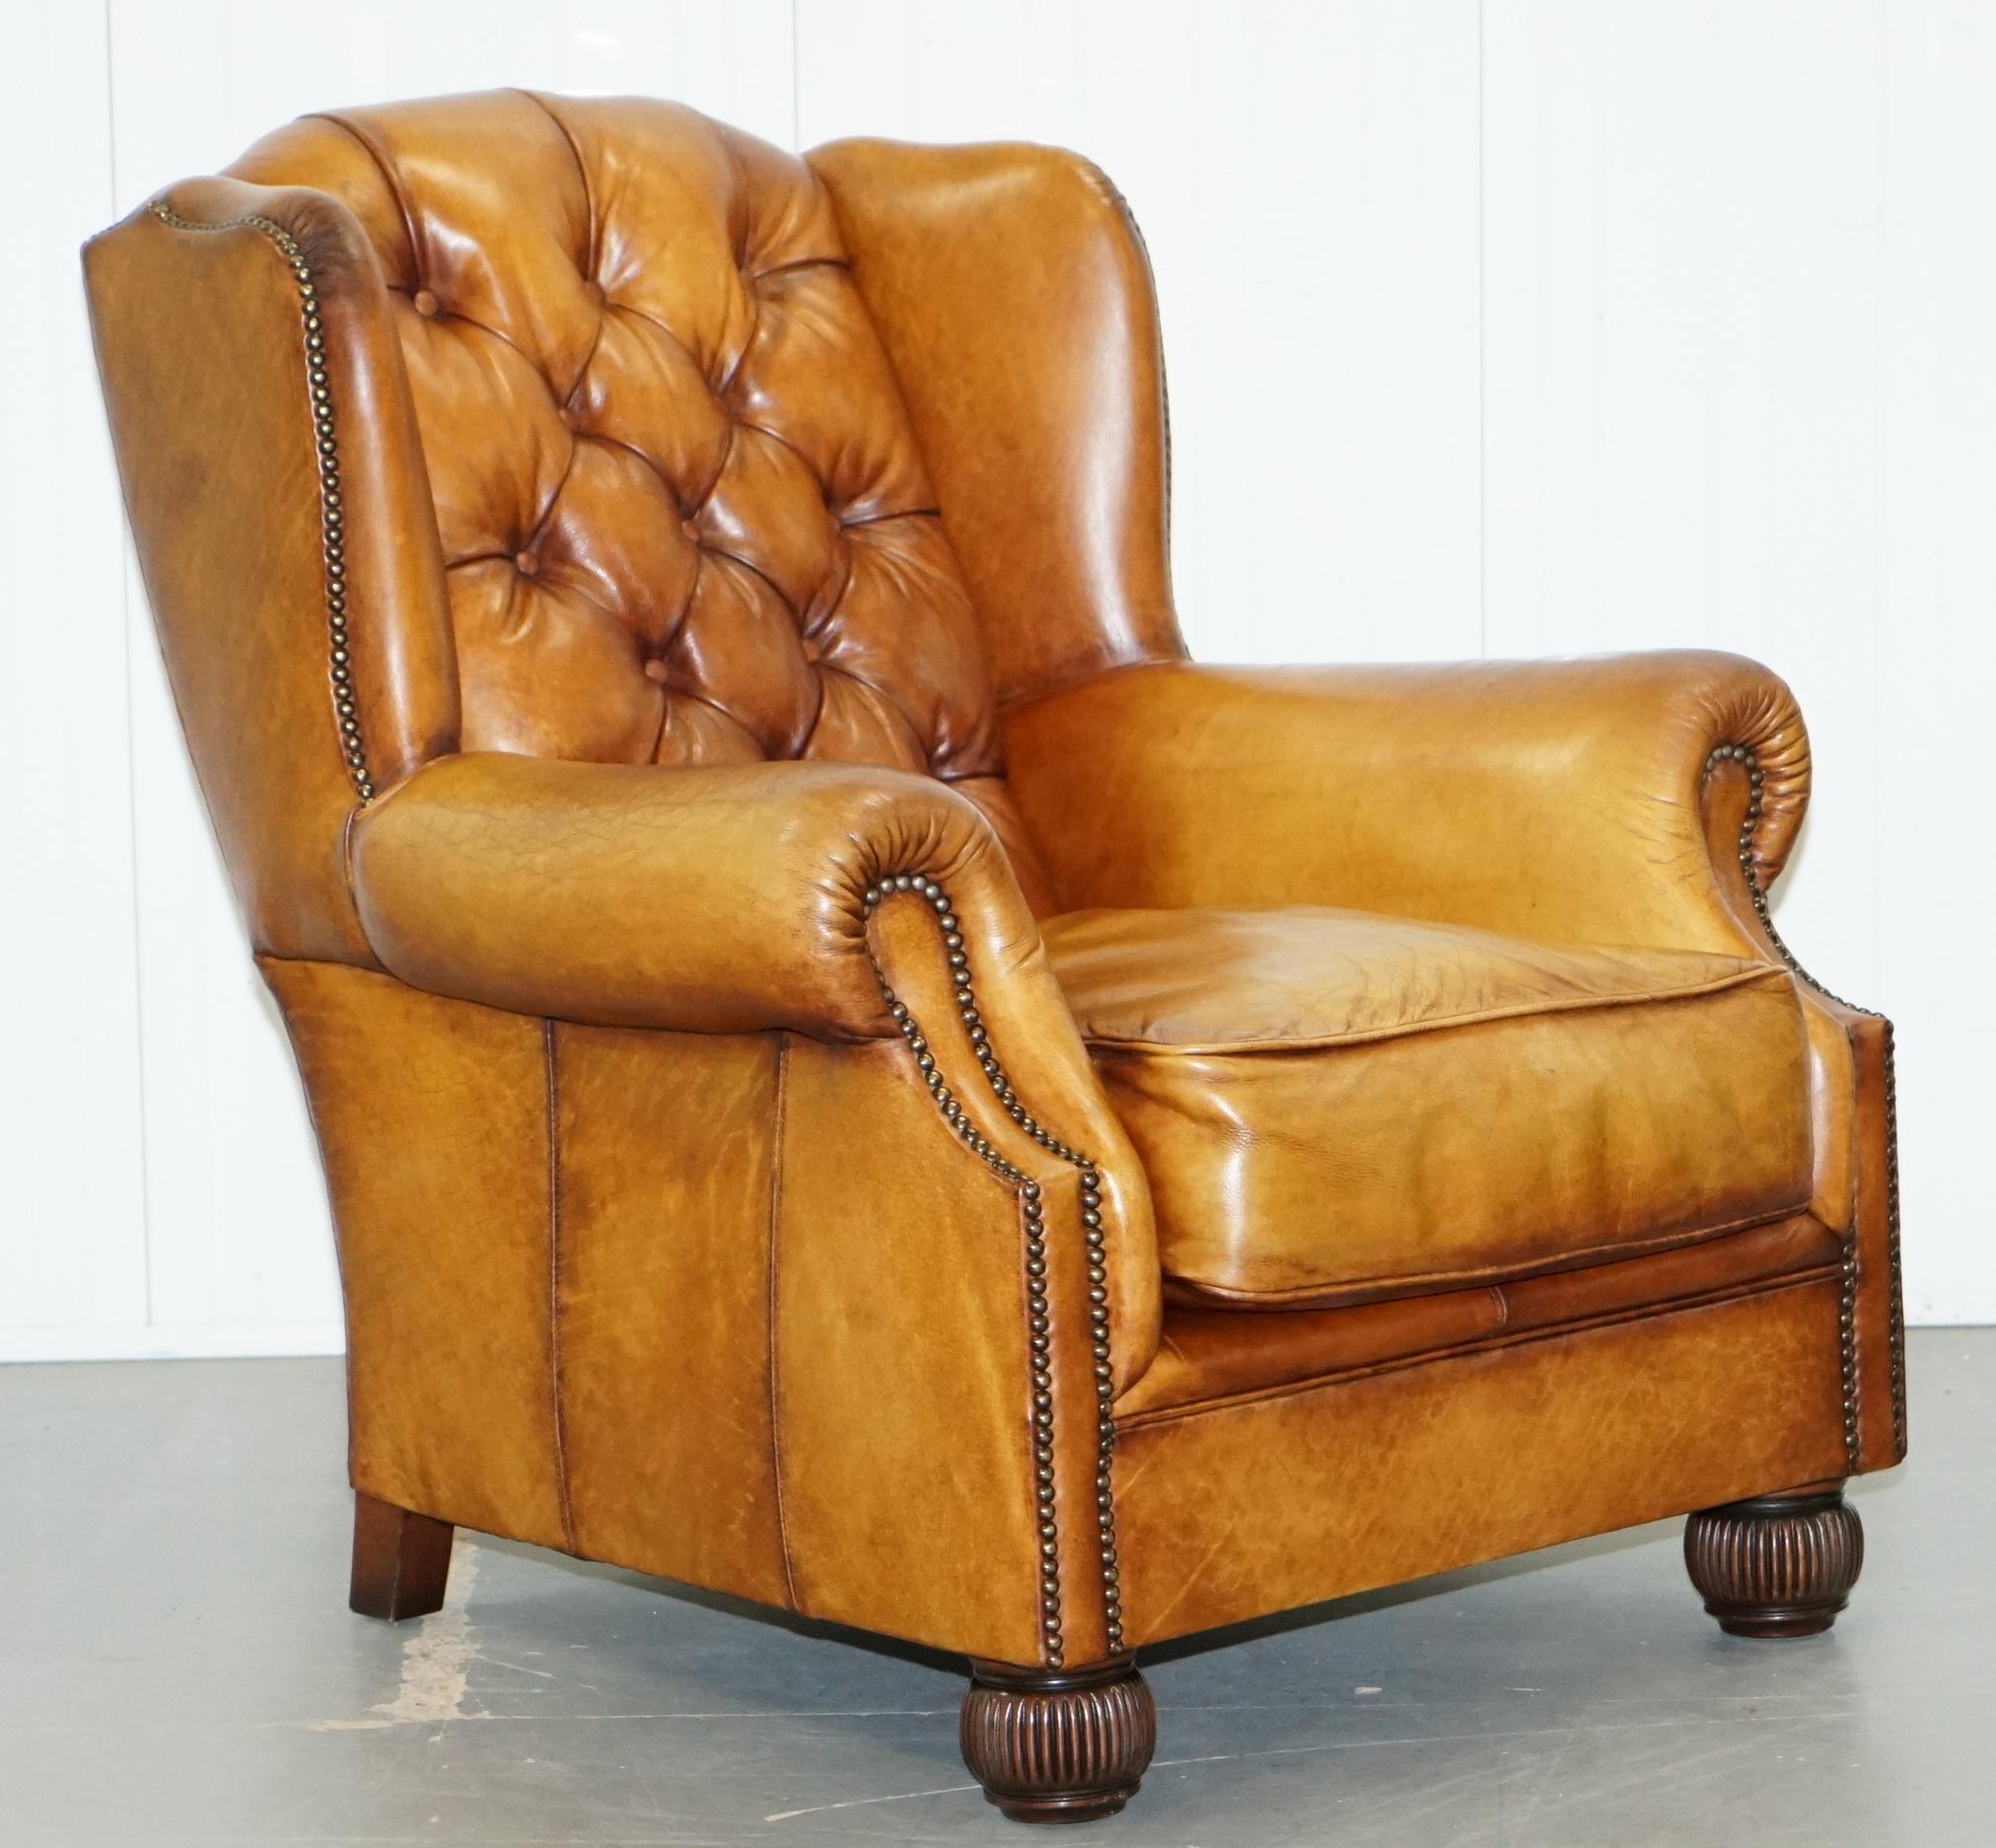 We are delighted to offer for sale this stunning pair of Tetrad Oskar Chesterfield aged brown leather armchairs 

One of the most iconic armchairs ever produced by Tetrad, they are exceptionally comfortable, handmade in England, the seat cushions